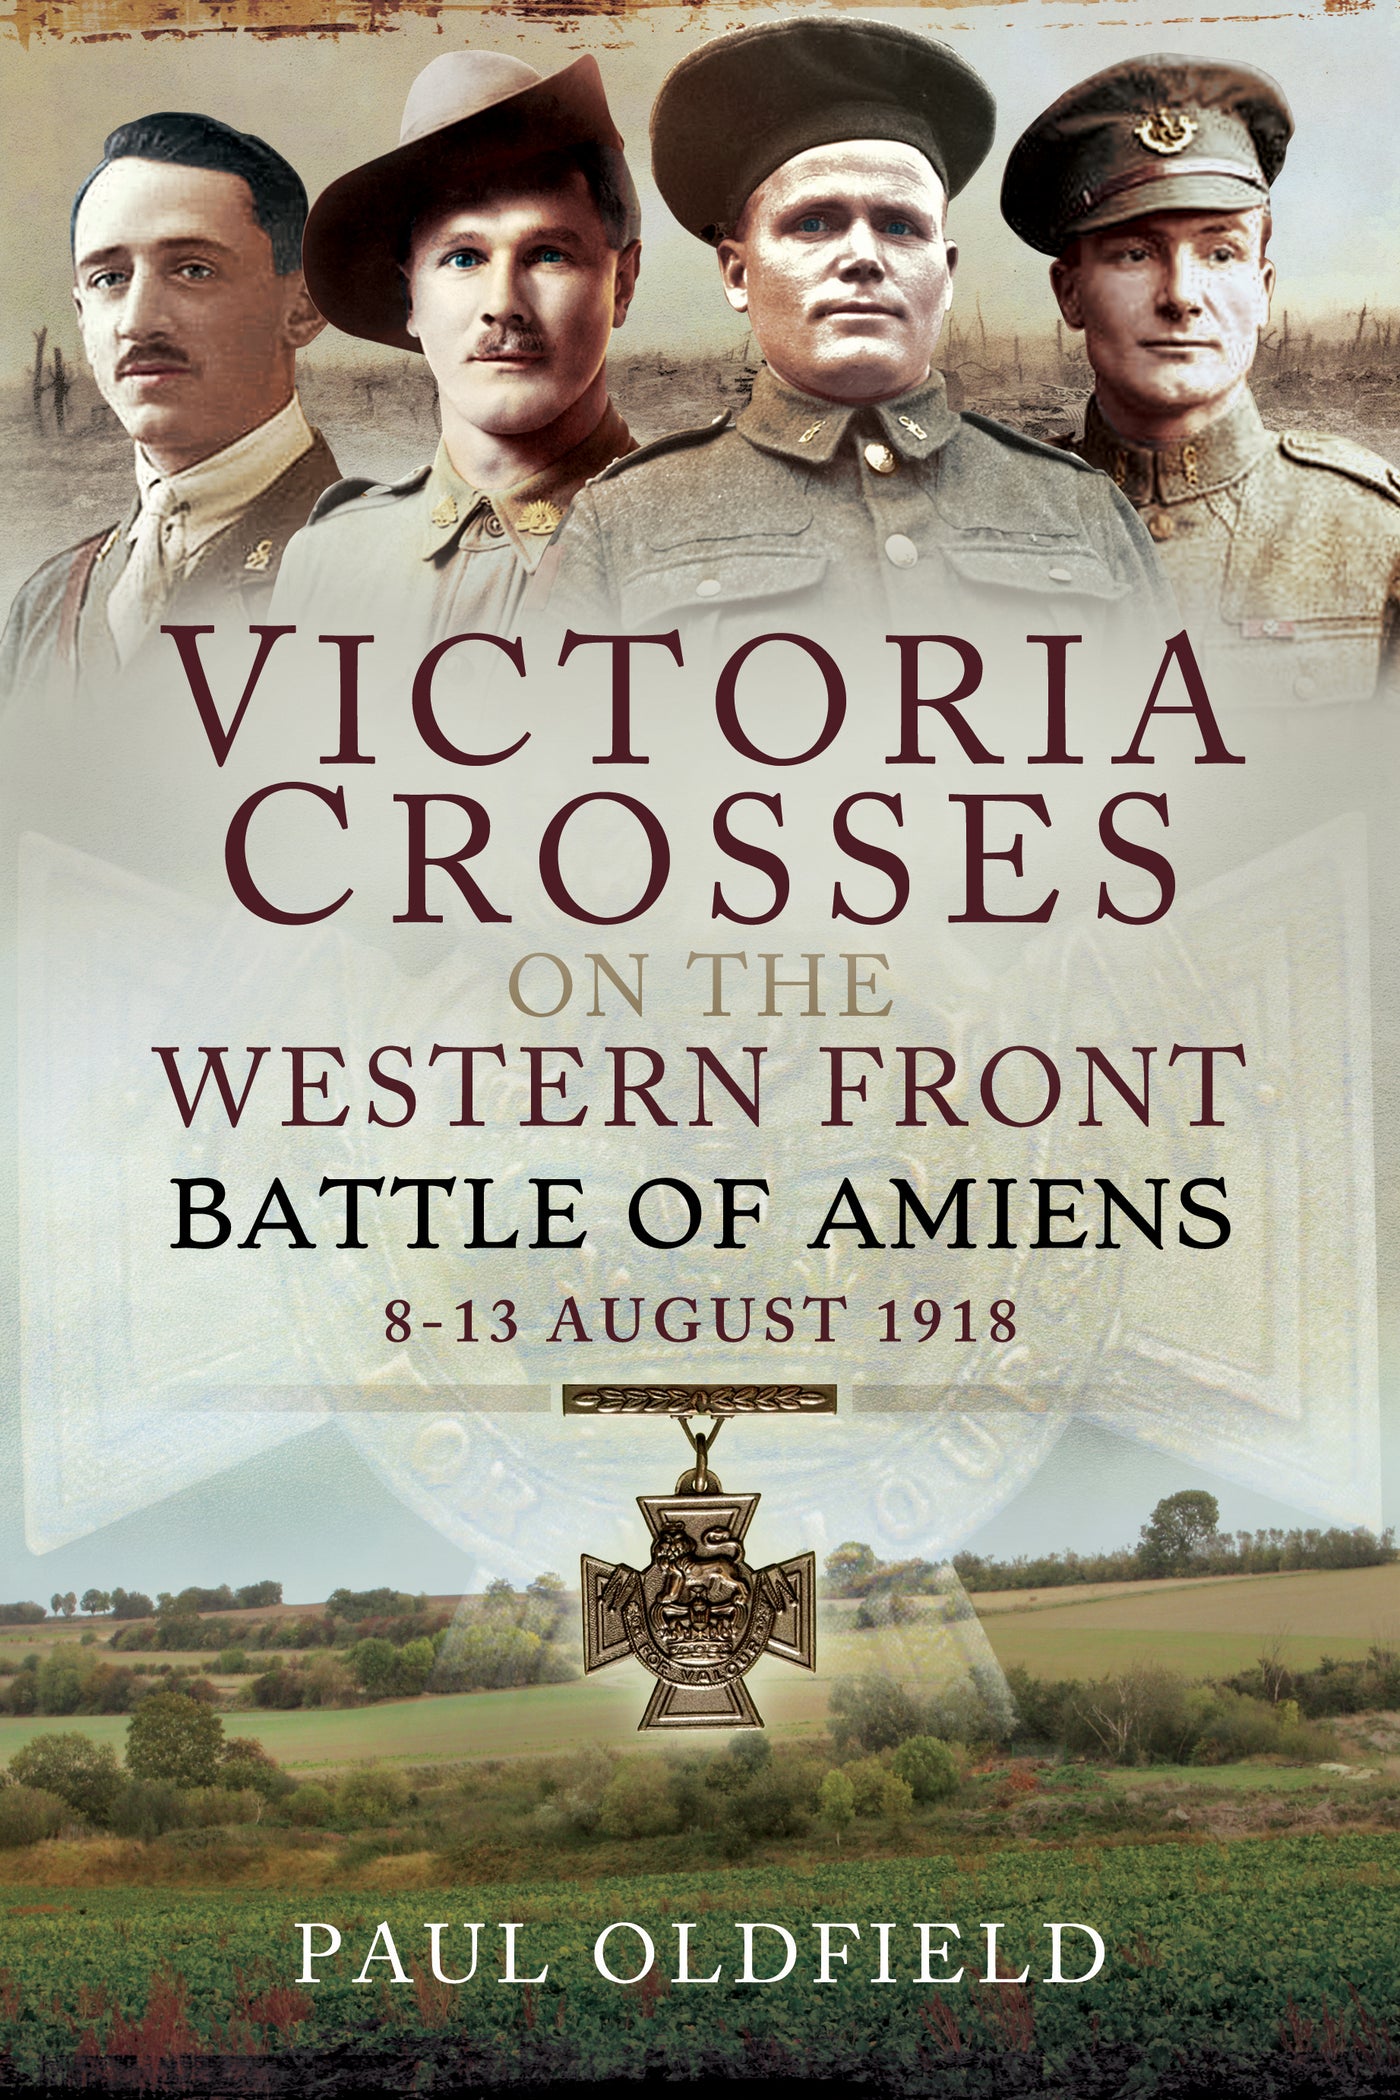 Victoria Crosses on the Western Front – Battle of Amiens